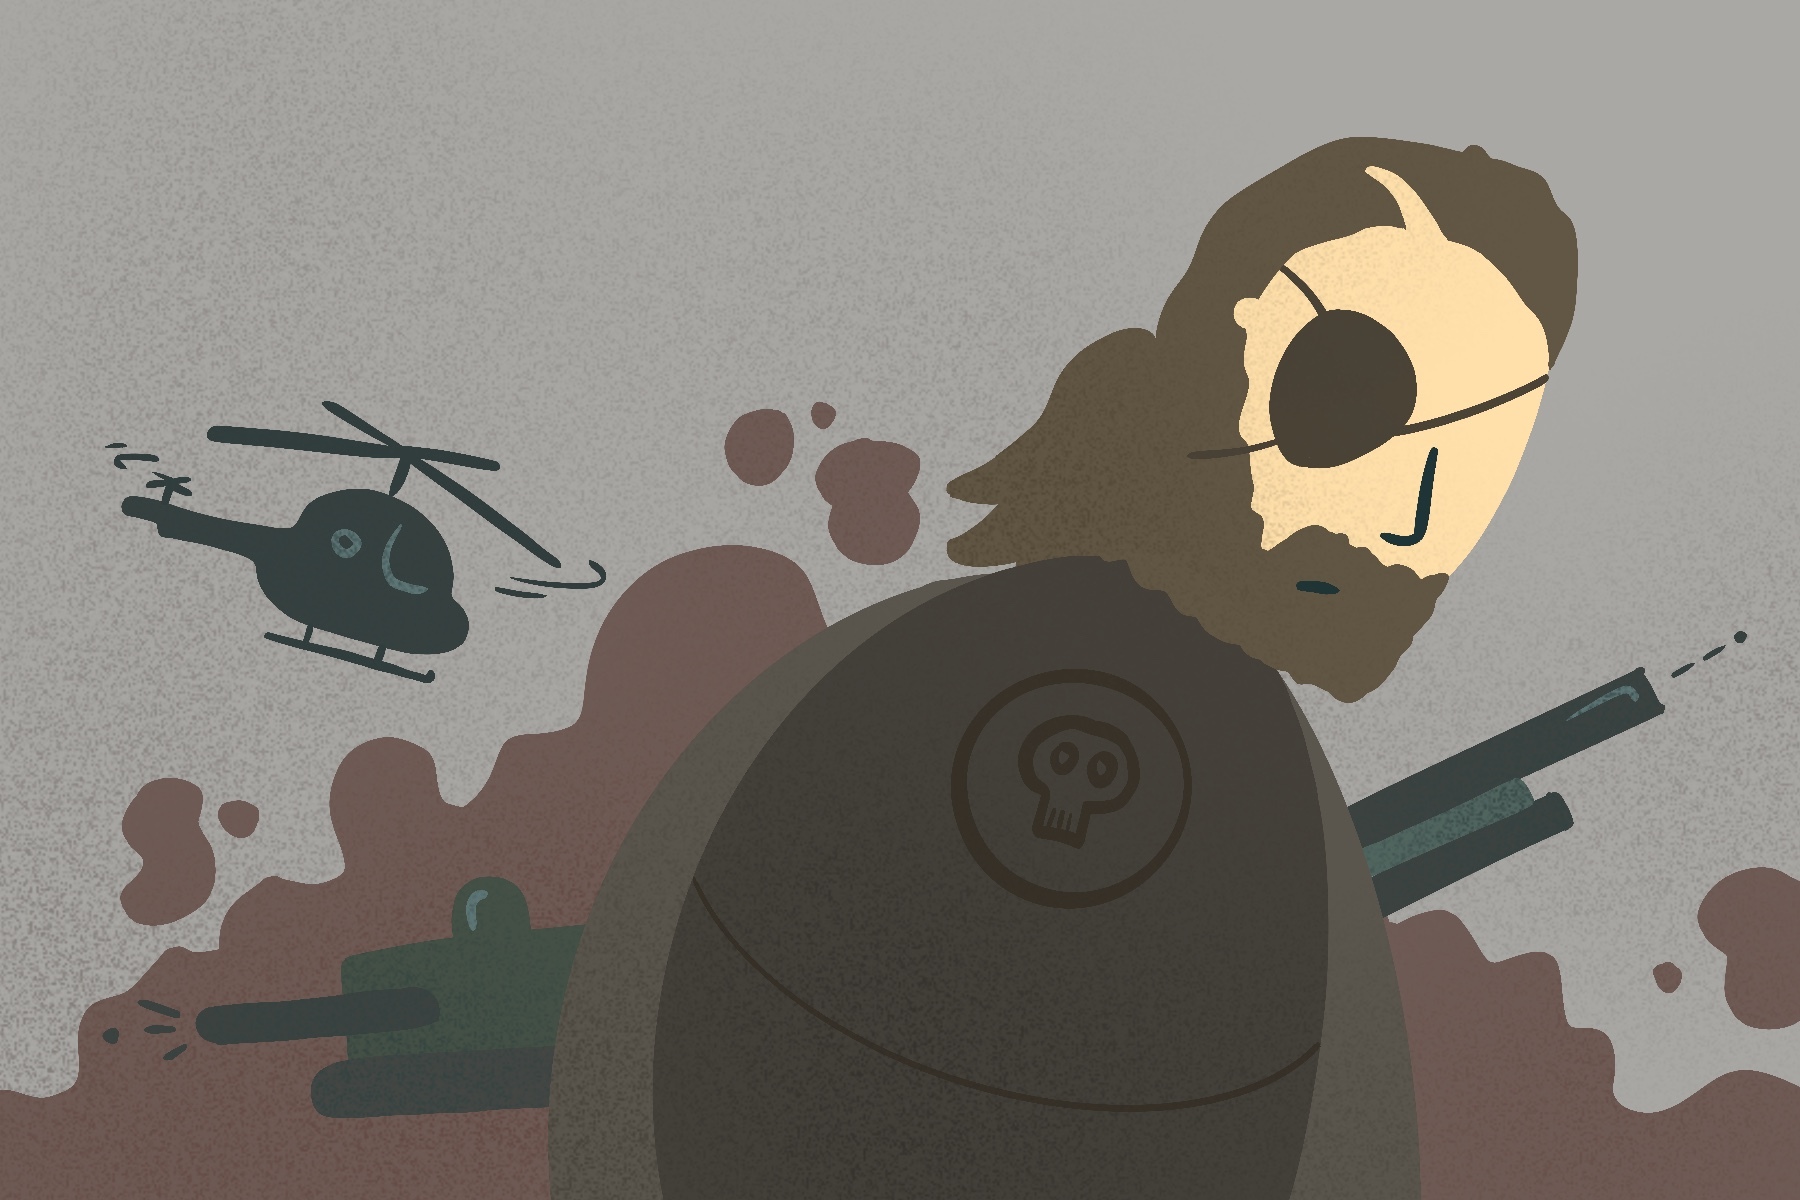 An illustration of Solid Snake from Metal Gear Solid for an article about the video game potentially being turned into a movie. (Illustration by Sonja Vasiljeva, San Jose State University)